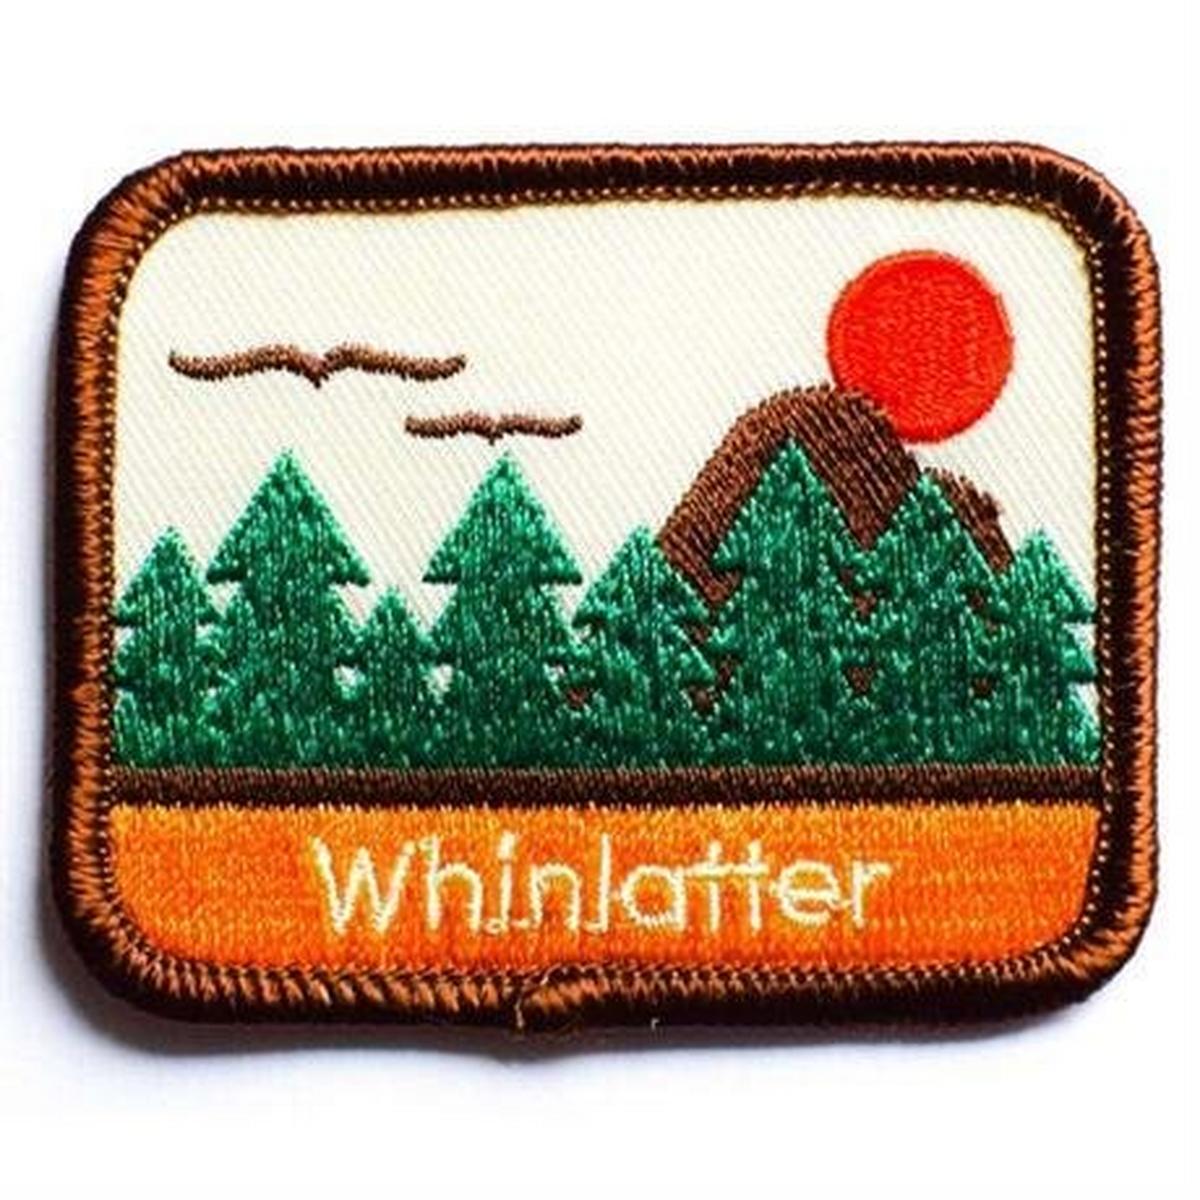 Conquer Lake District Patch - Whinlatter